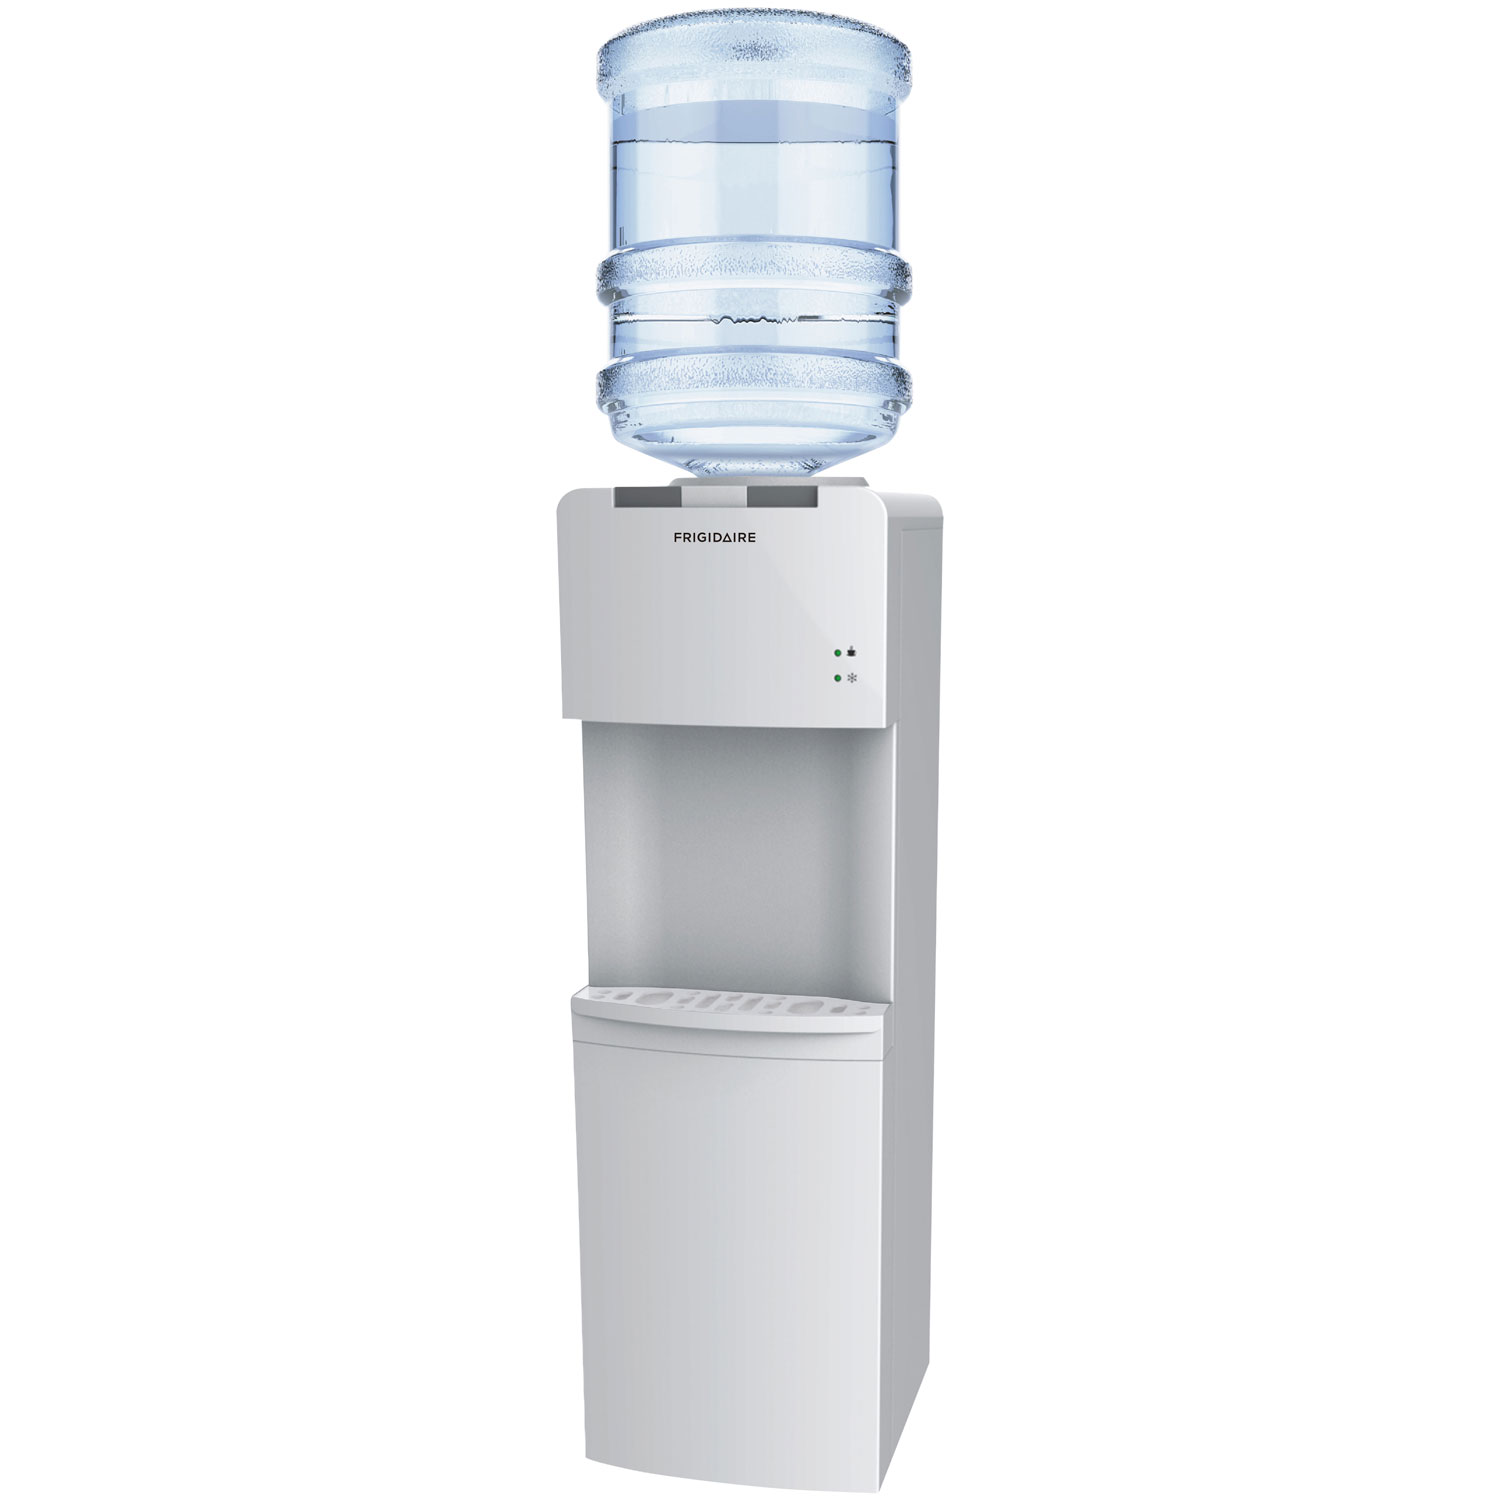 Frigidaire Water Cooler (EFWC49) - White